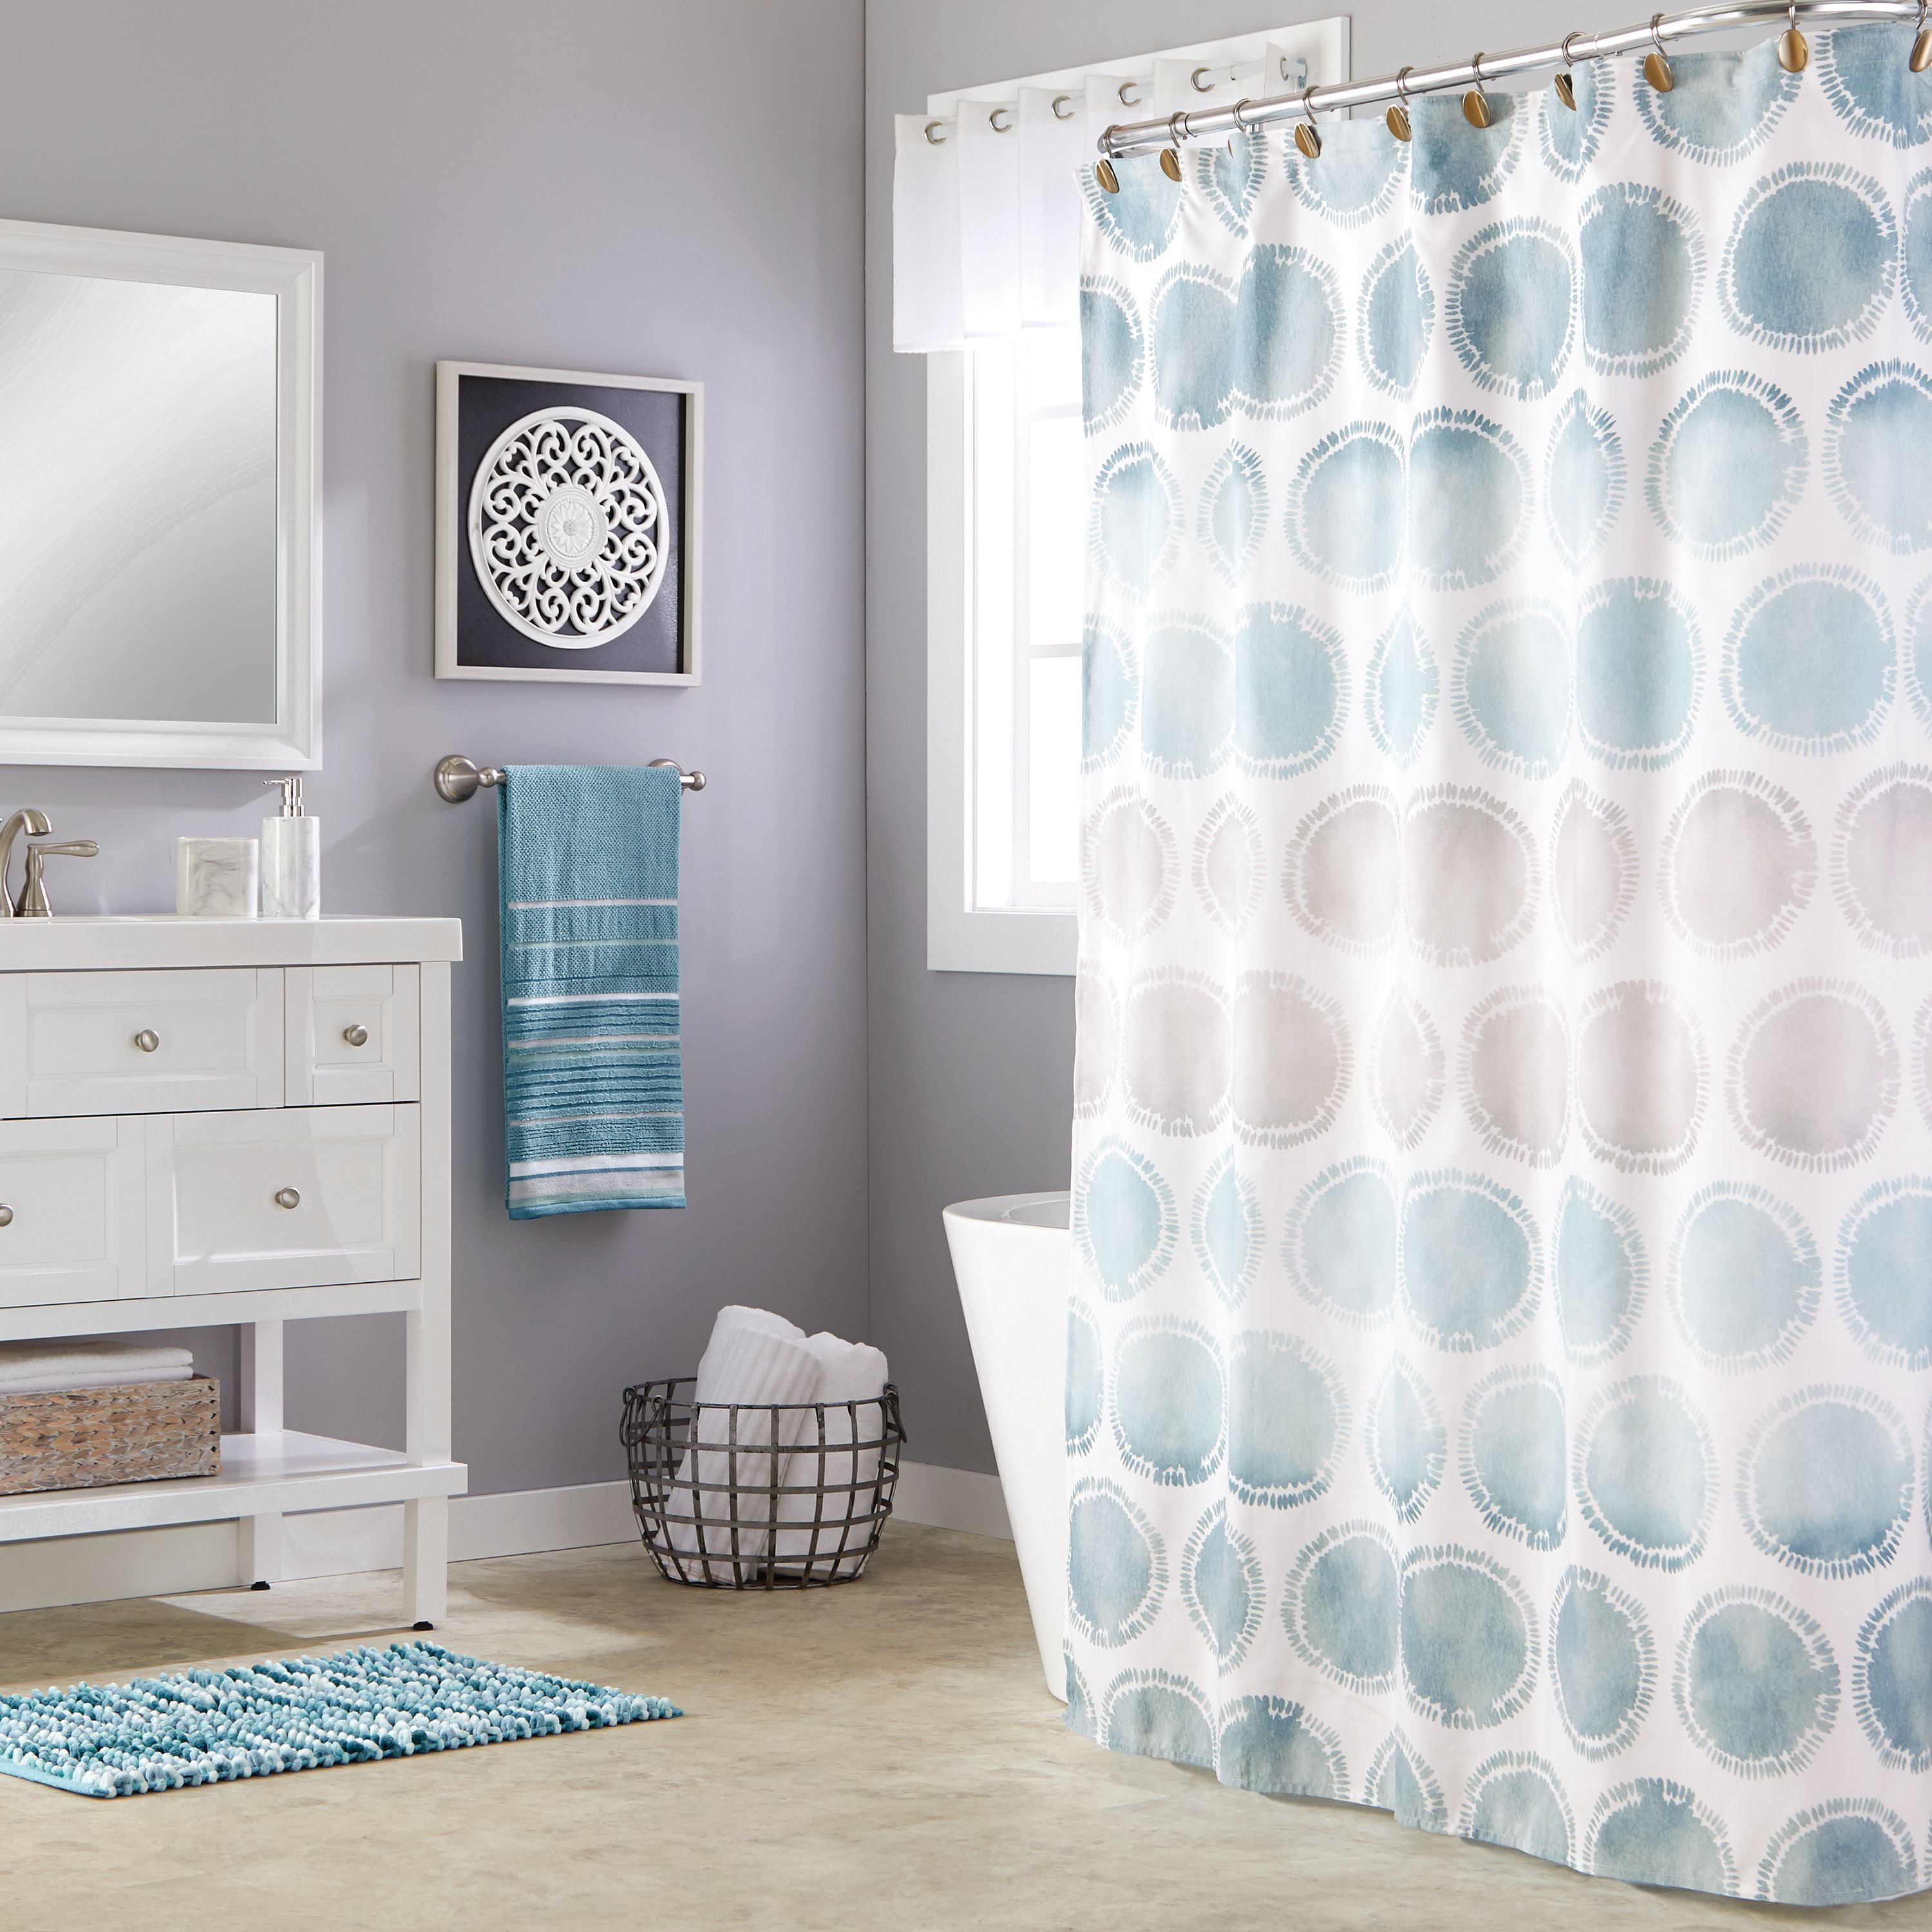 Skl Home Swag Circles Fabric Shower, Teal And Tan Shower Curtain